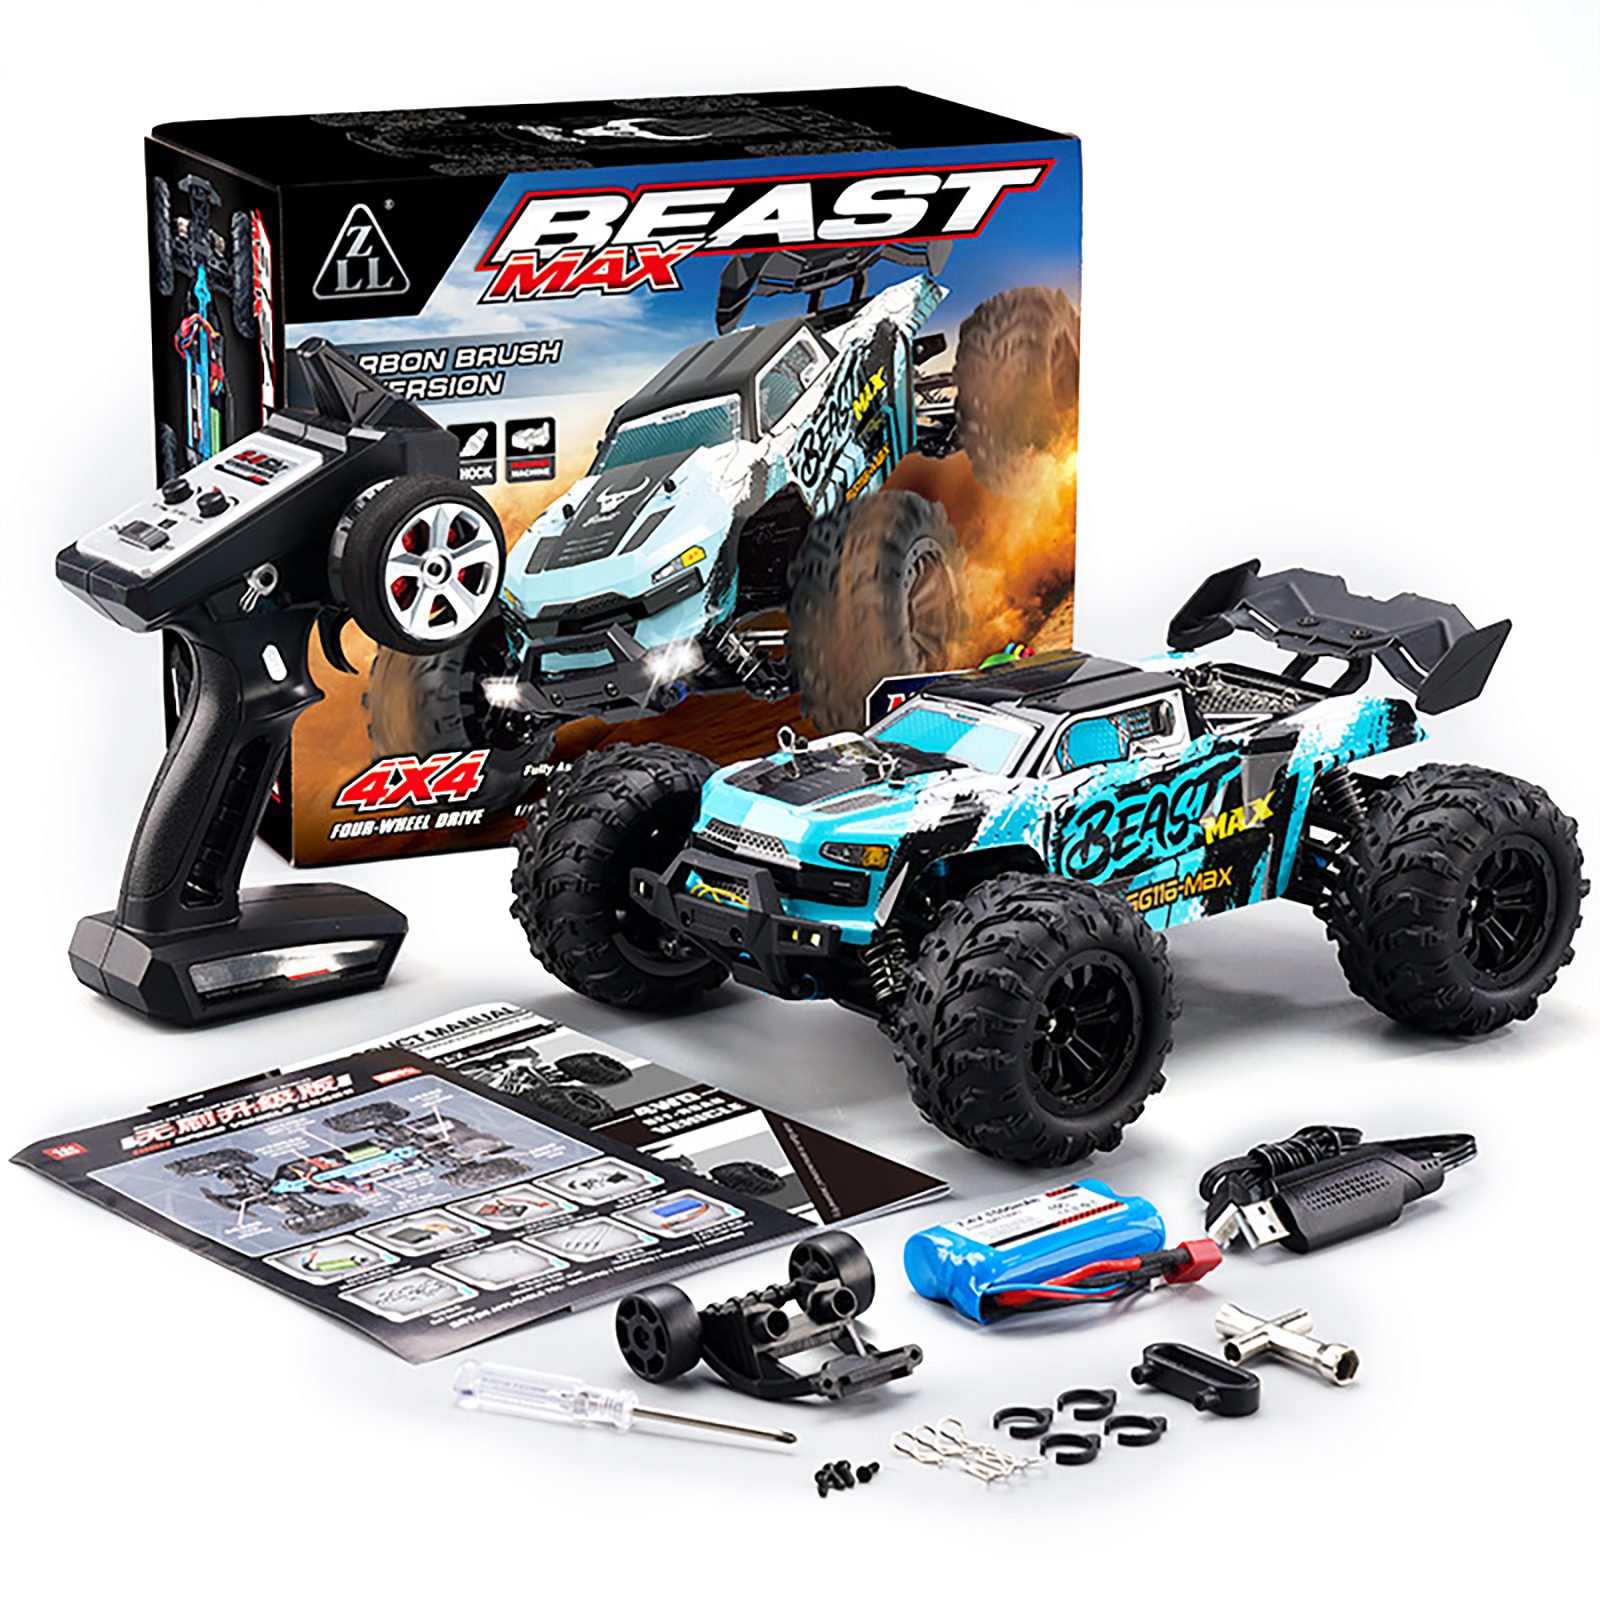 1:16 Scale Remote Control Car Brushless 4wd Off-Road Vehicle High-Speed Car Model Toys for Boys Gifts